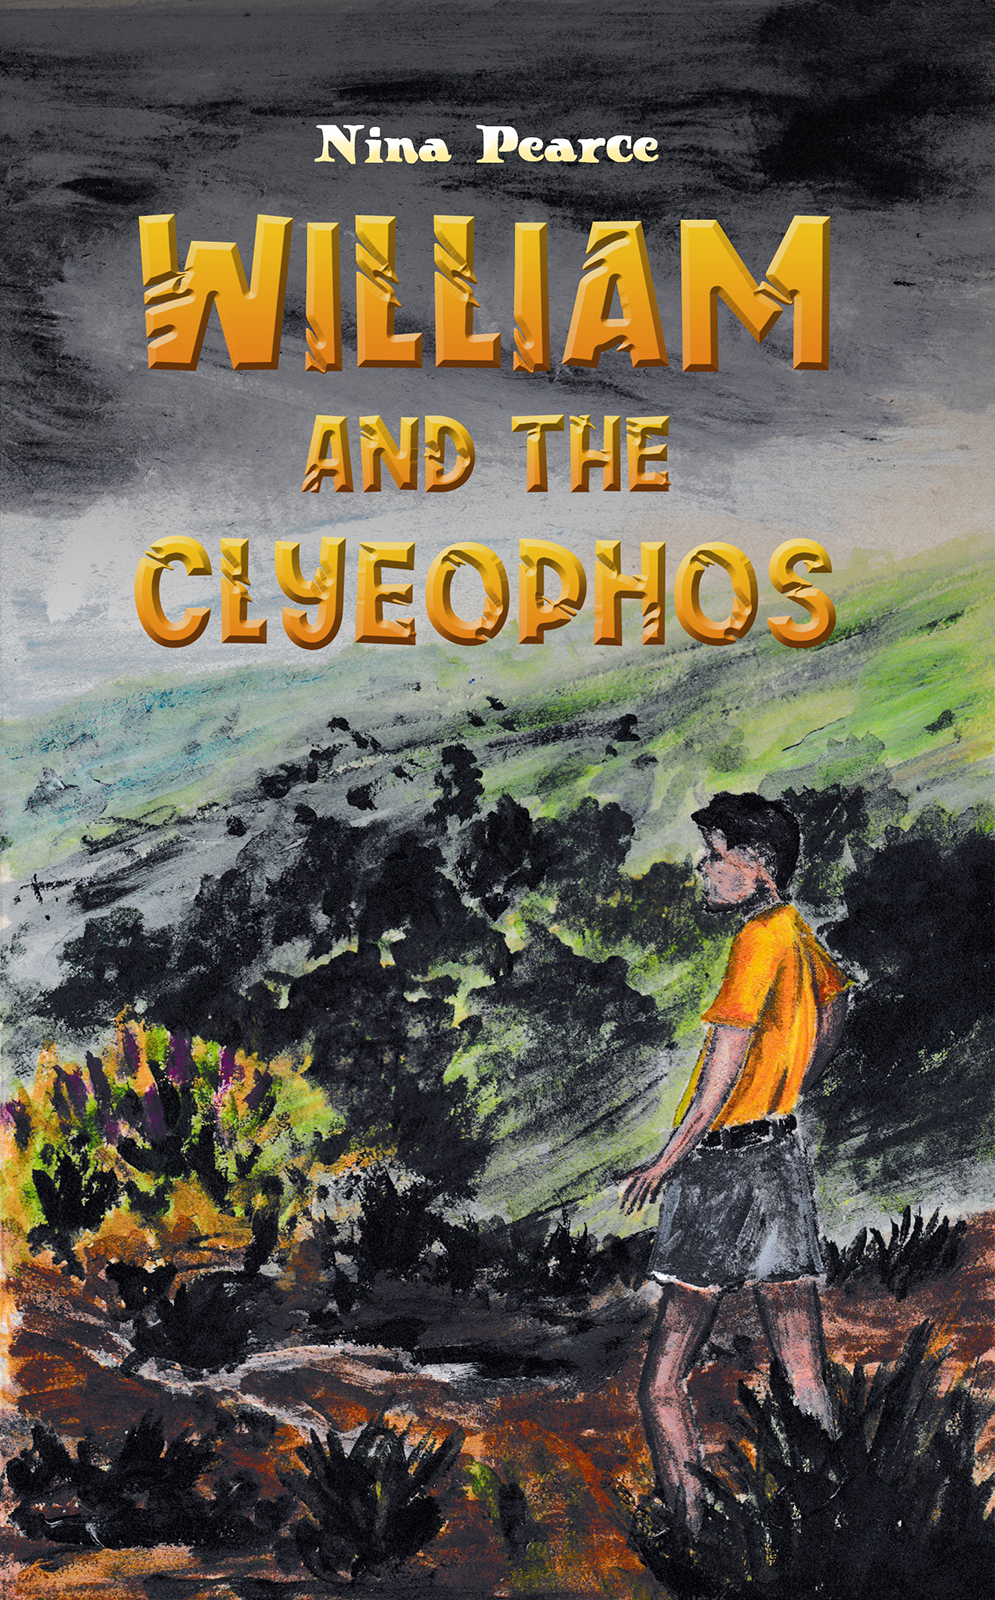 This image is the cover for the book William and the Clyeophos